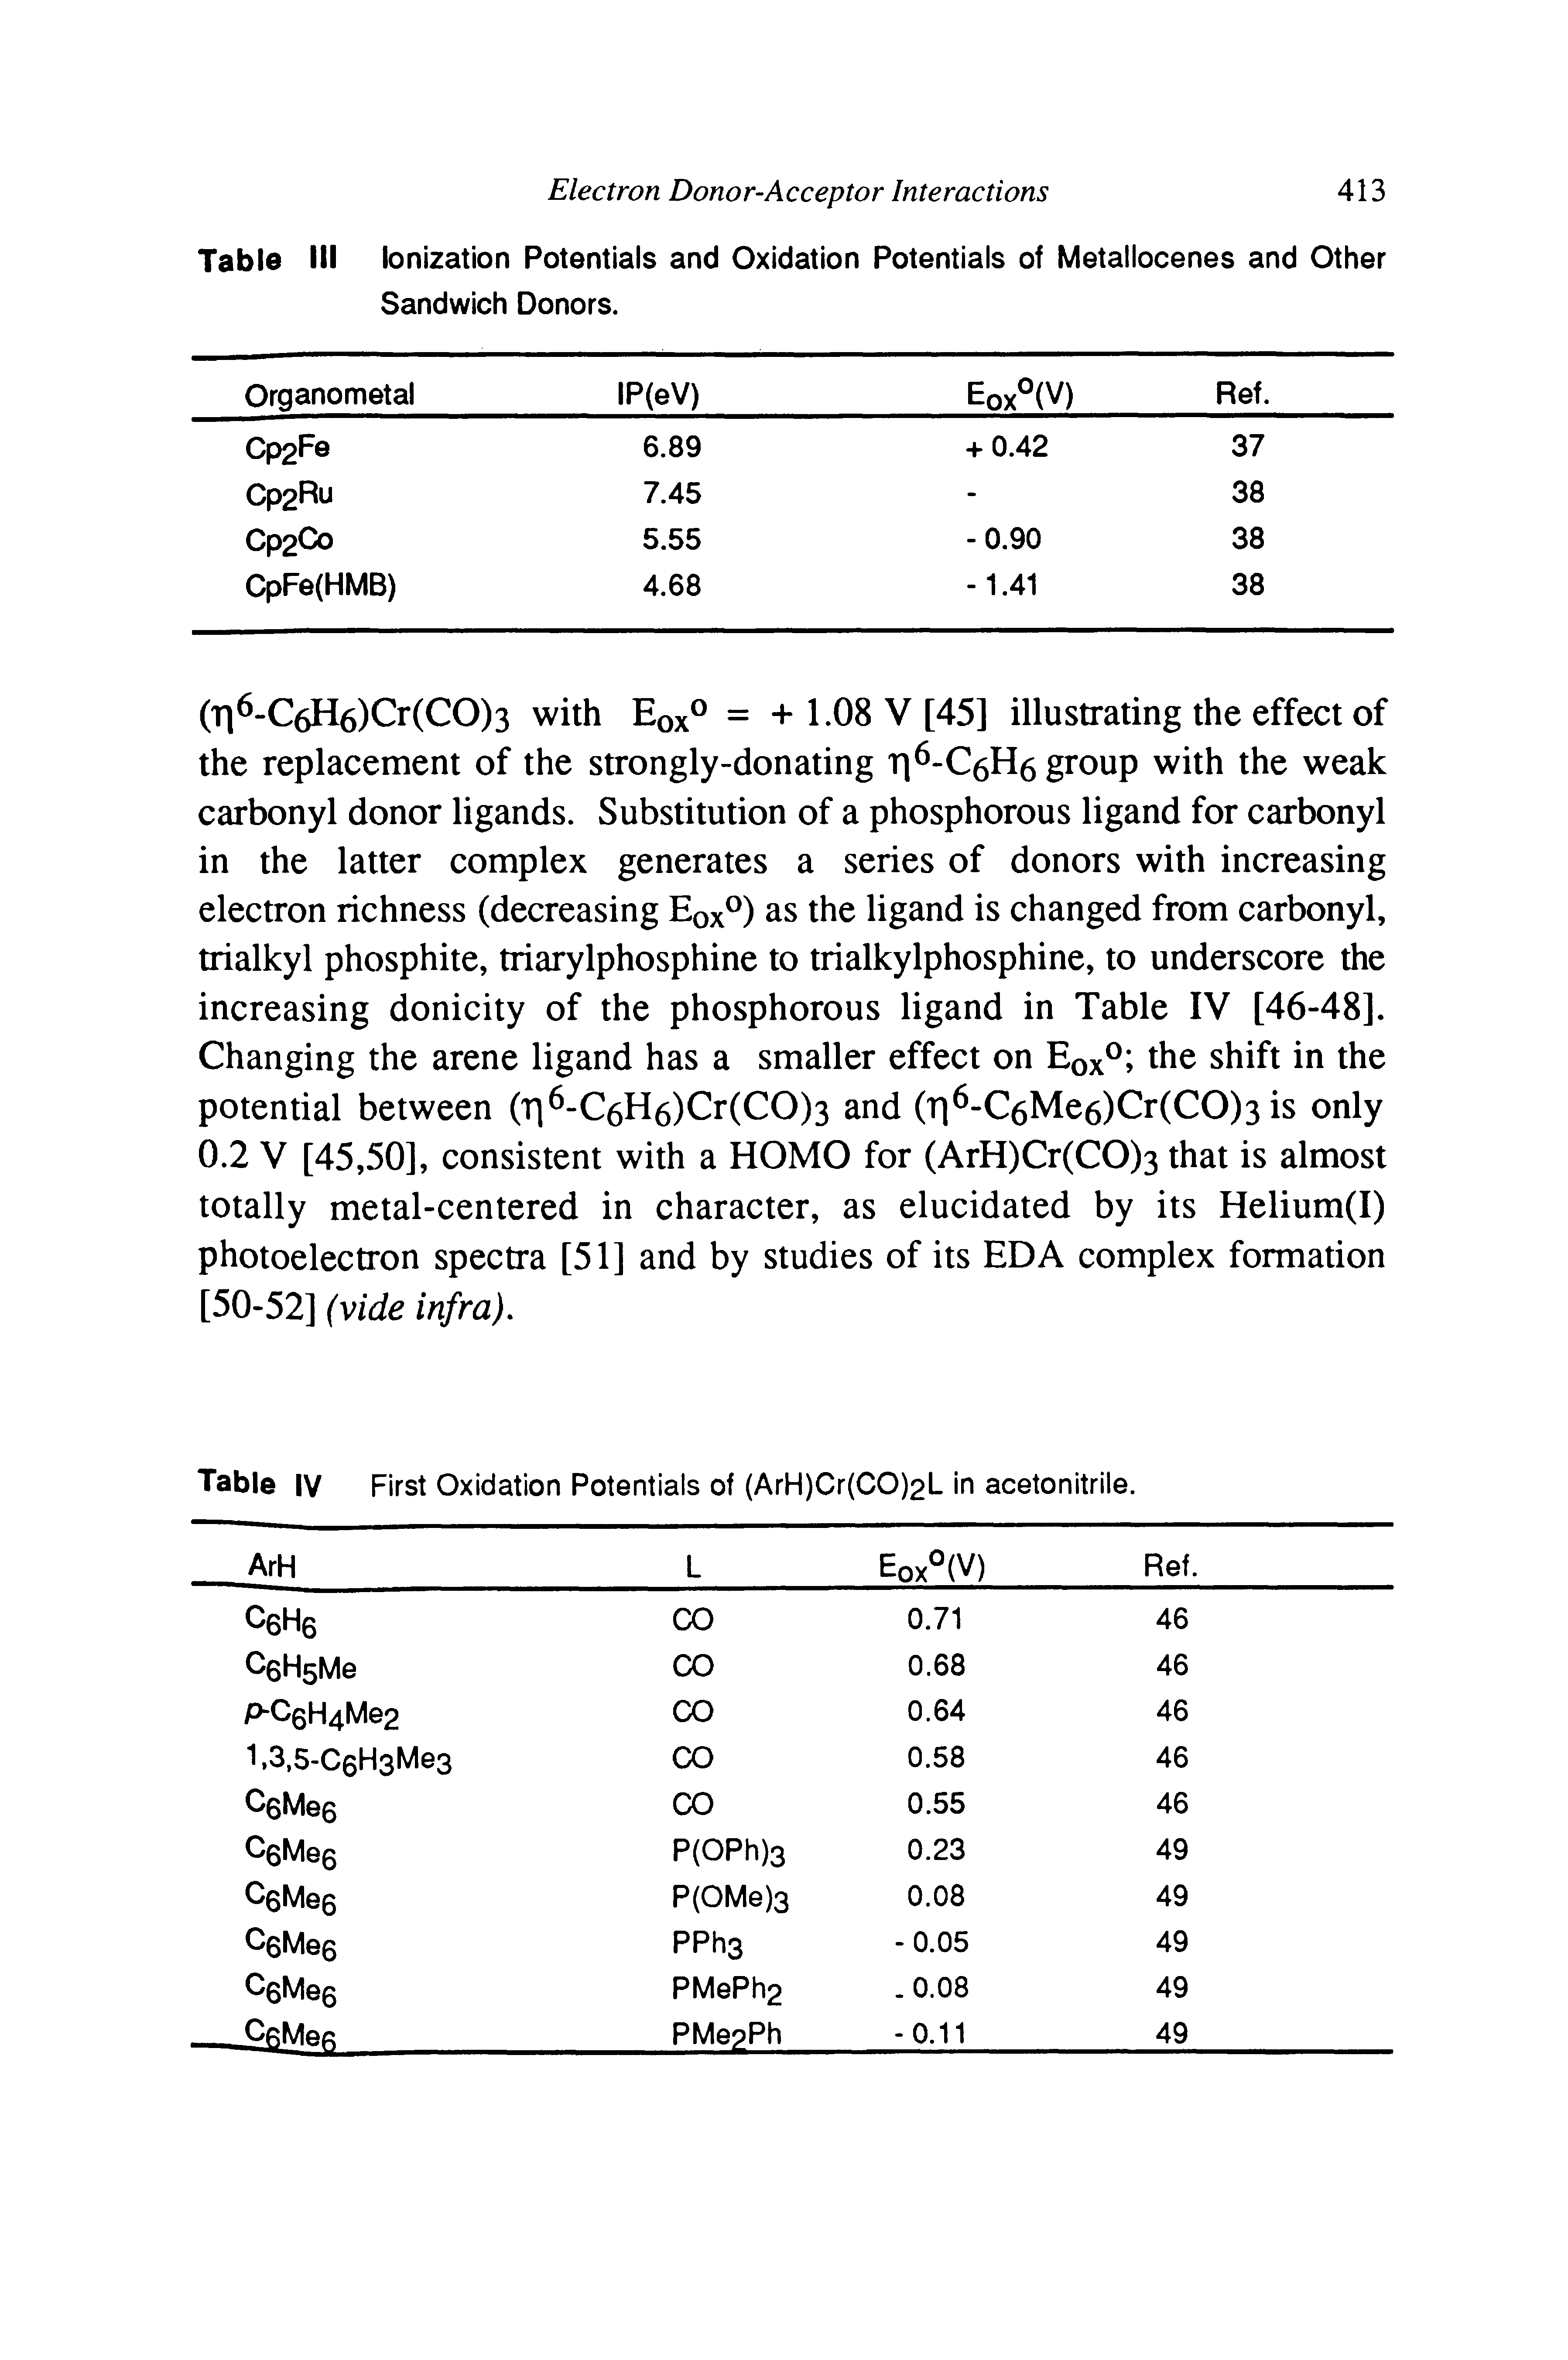 Table III Ionization Potentials and Oxidation Potentials of Metallocenes and Other Sandwich Donors.